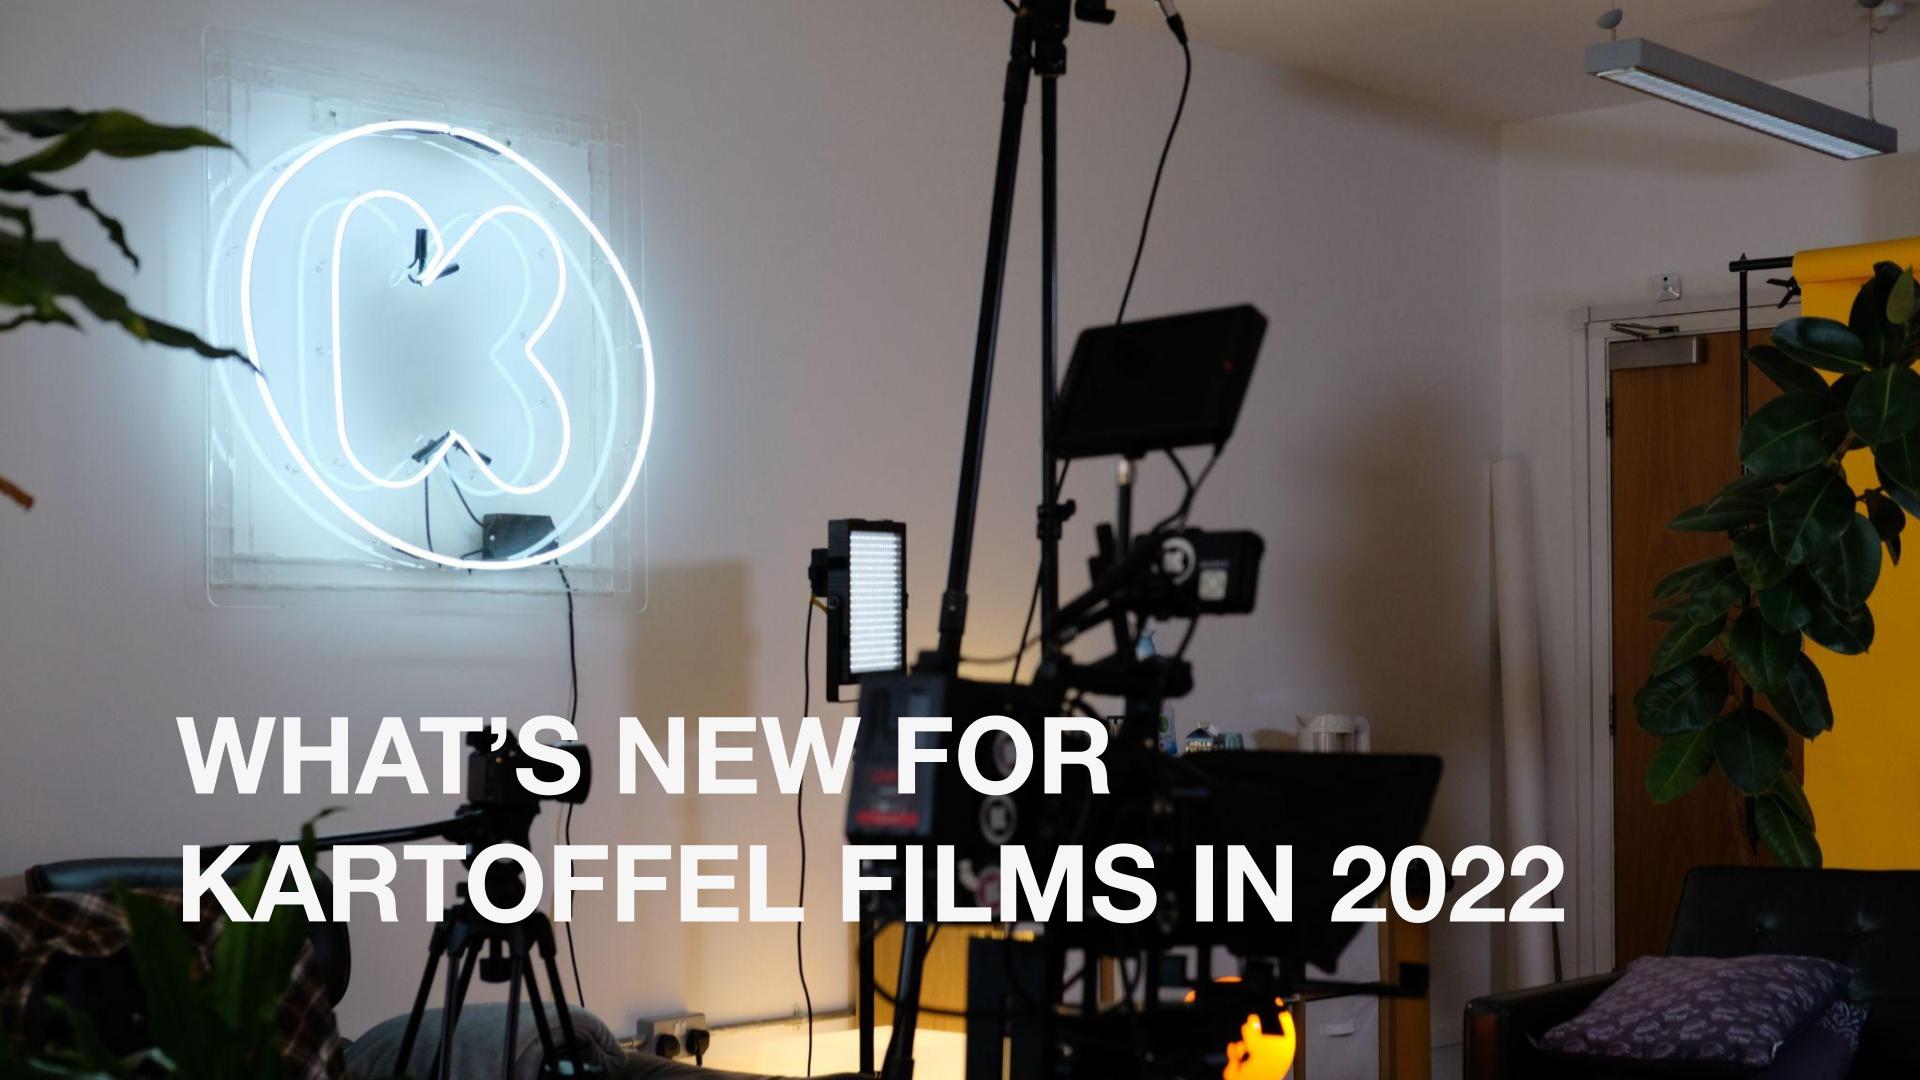 What's New For Kartoffel Films in 2022